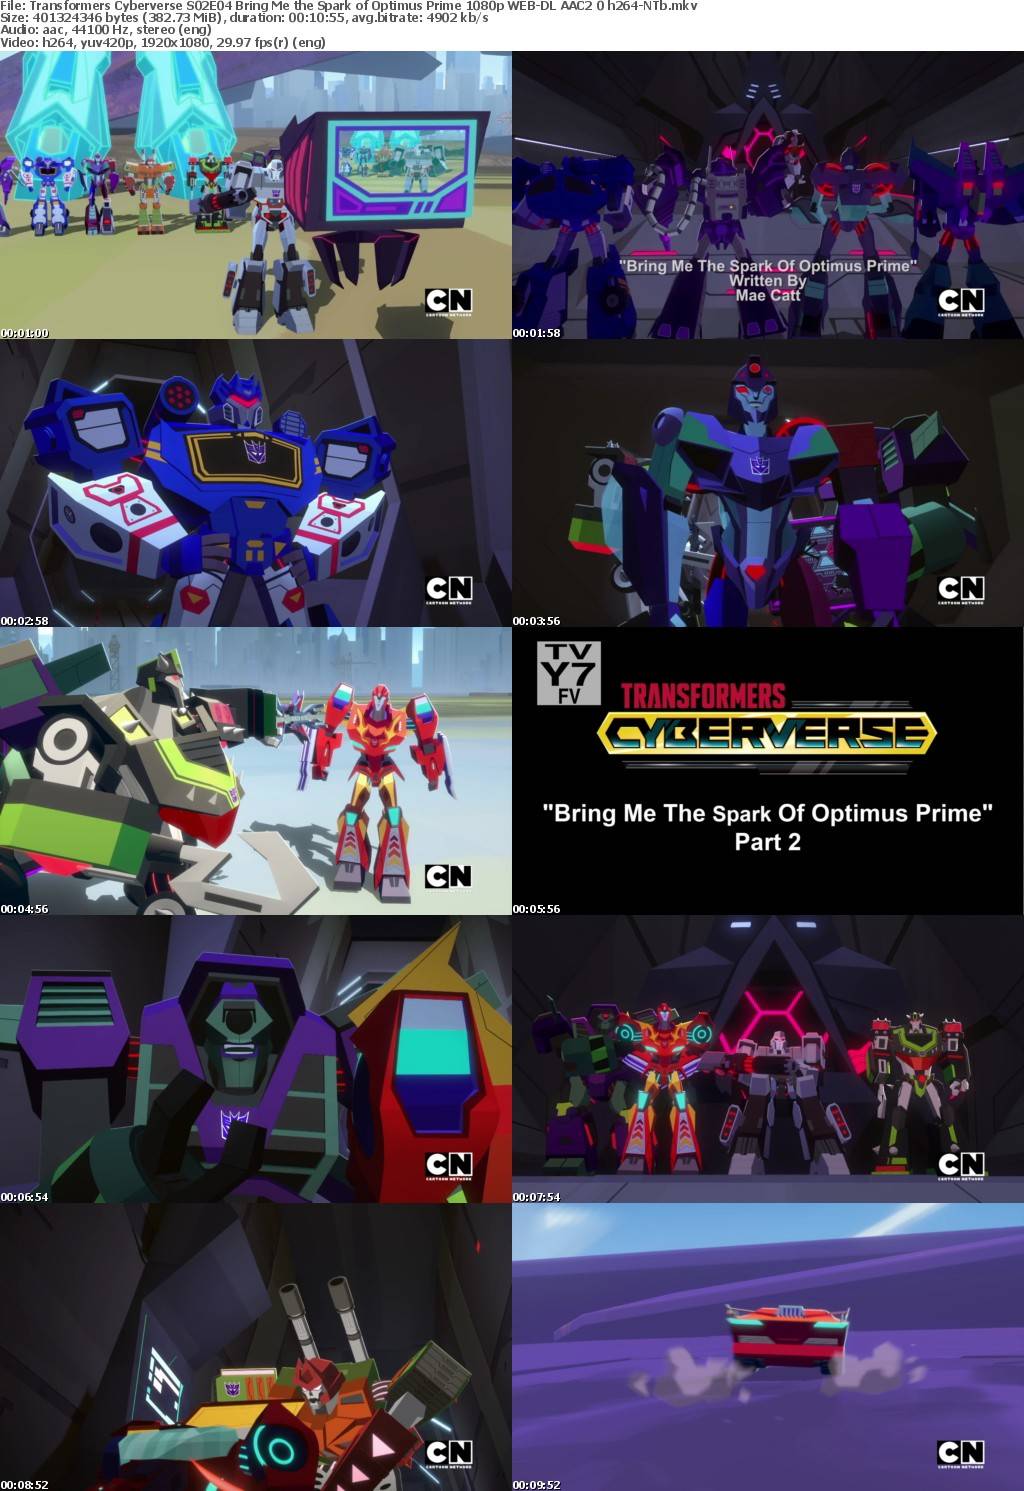 Transformers Cyberverse S02E04 Bring Me the Spark of Optimus Prime 1080p WEB-DL AAC2 0 h264-NTb